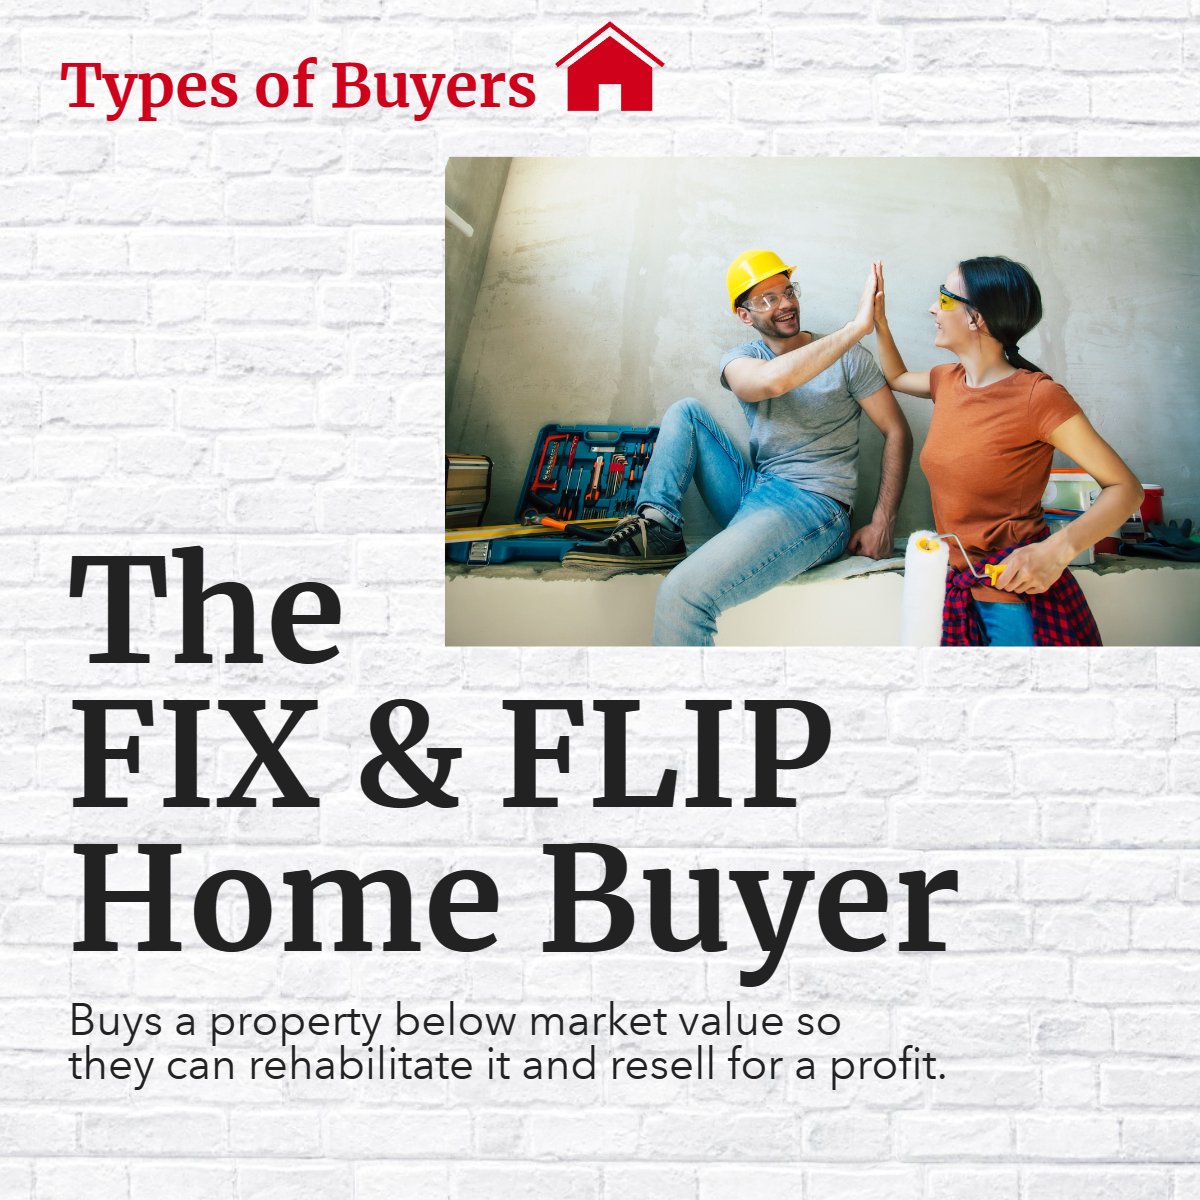 Are you a Fix & Flip type of buyer? 

Let us know below!

#FixAndFlip #RealEstate
 #lannonstonerealty